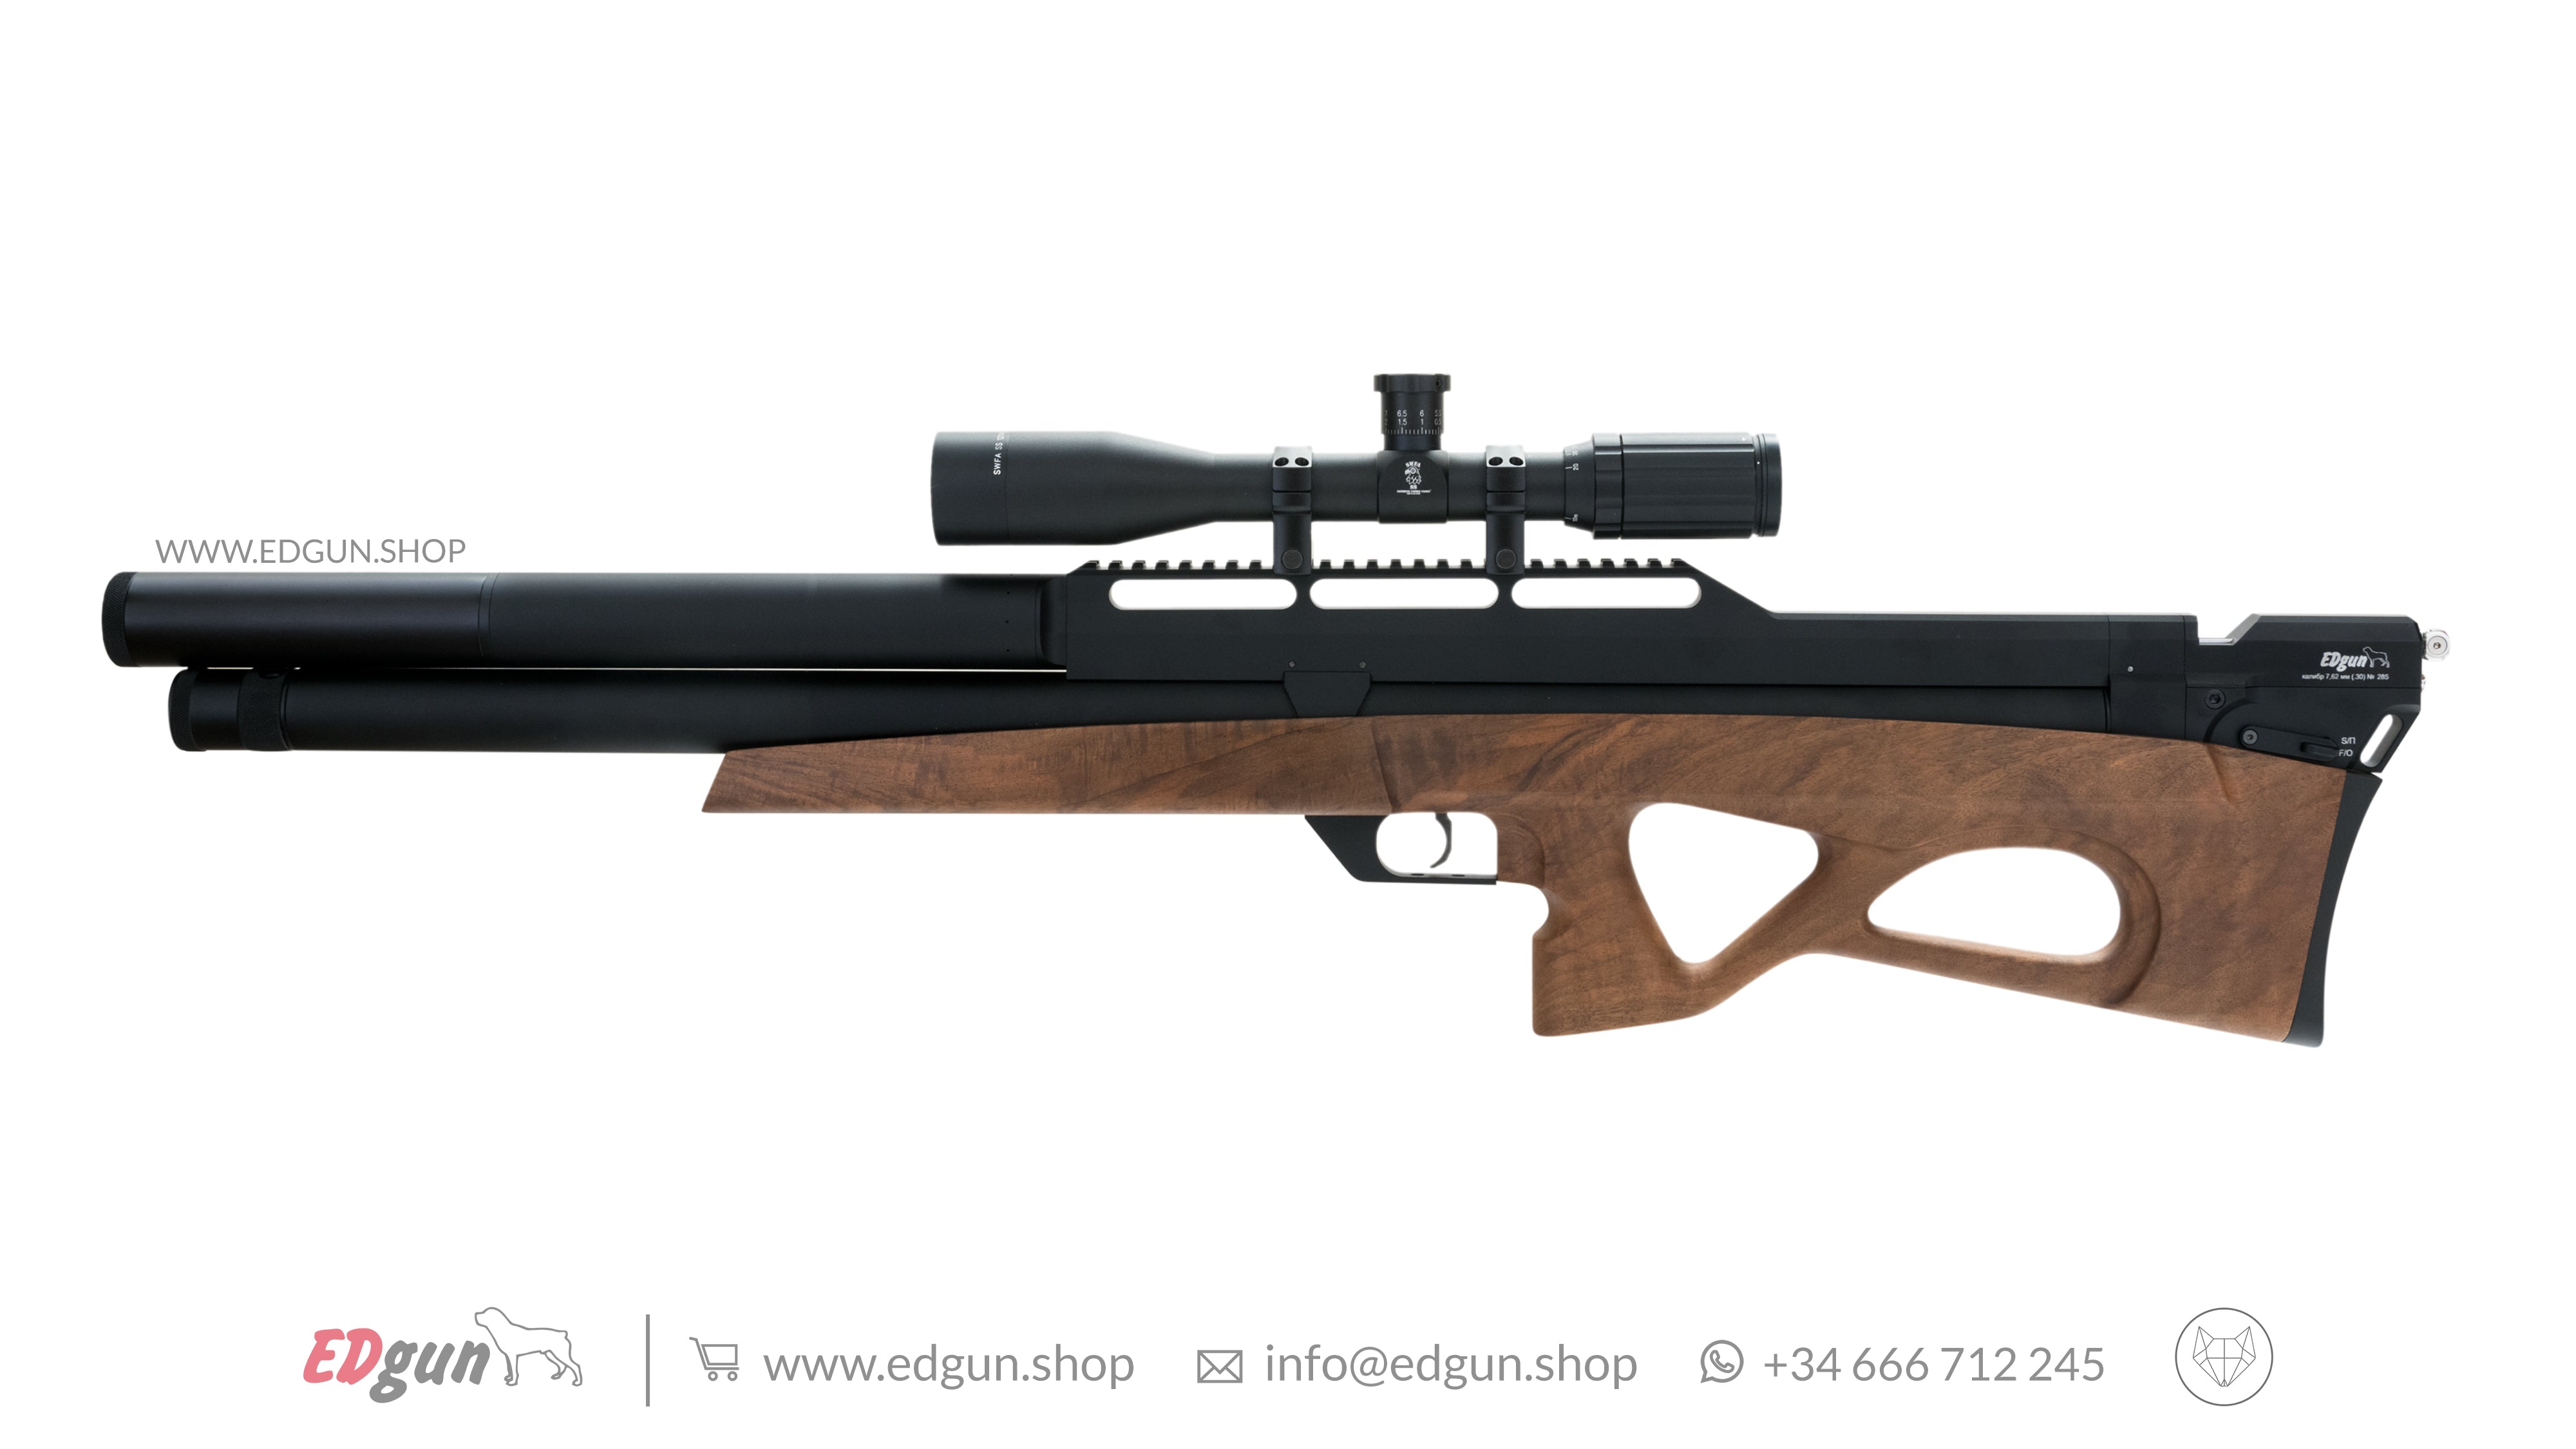 Side view of the Super Long Limited Edition of EDgun Matador R5